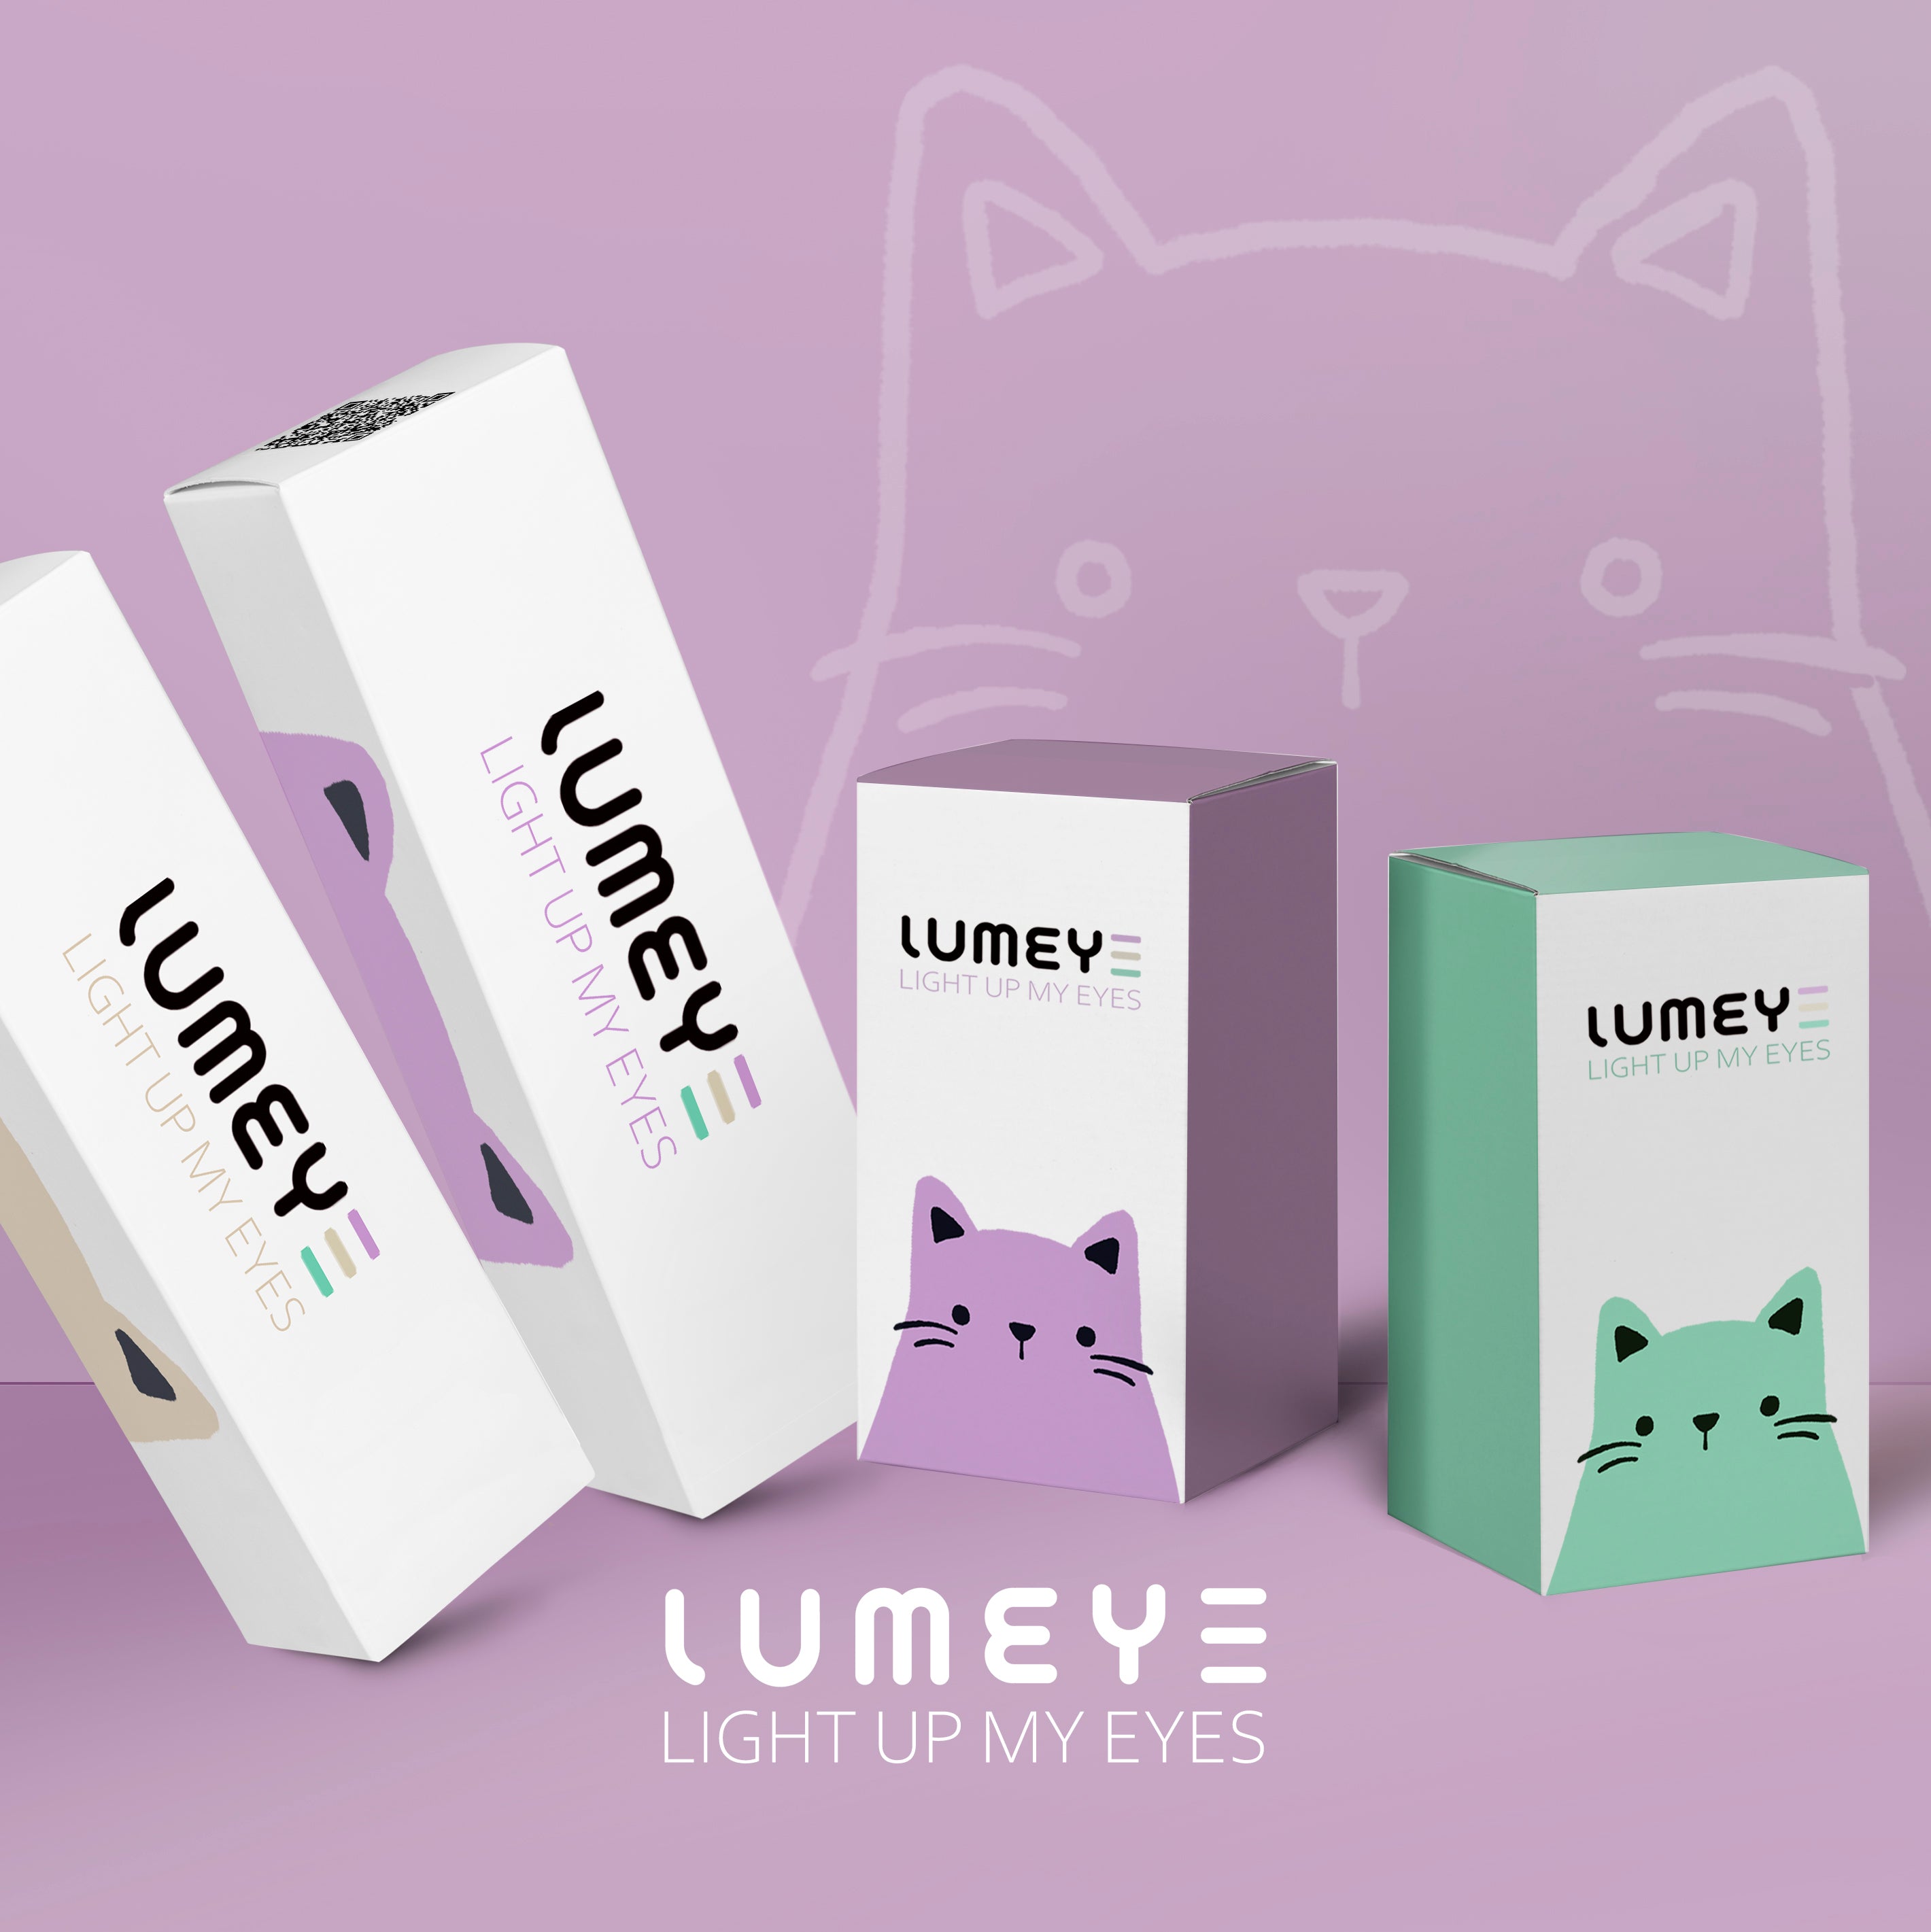 Best COLORED CONTACTS - LUMEYE Chubby Blue Colored Contact Lenses - LUMEYE